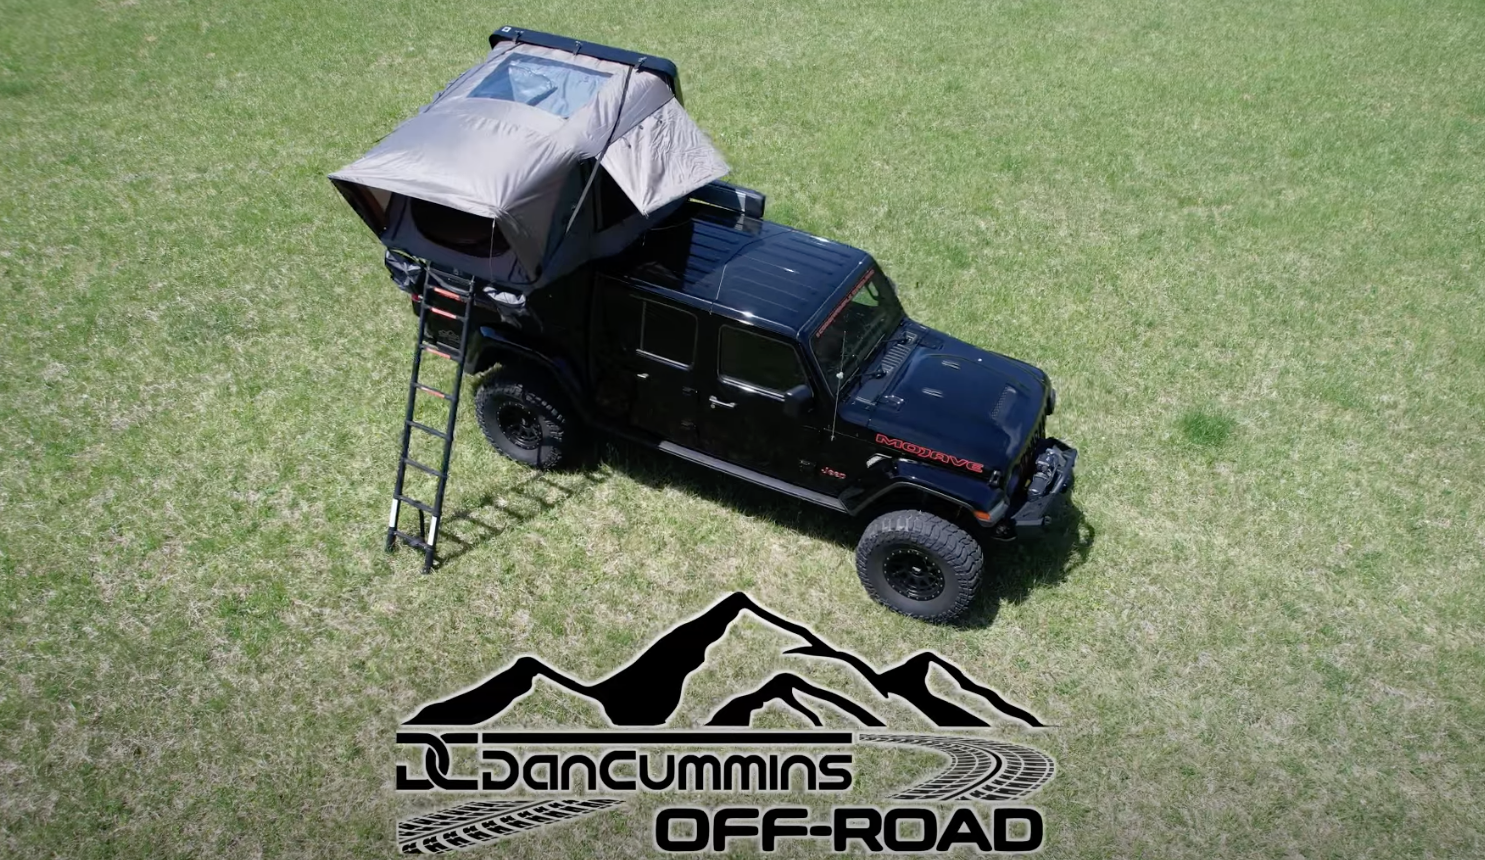 Aerial view of a black off-road vehicle with a rooftop tent set up on a grassy field. The tent is open, with a ladder leading up to it, perfect for overland adventurers. The Dan Cummins Off-Road logo, featuring mountains and a tire tread pattern, is displayed at the bottom of the image.